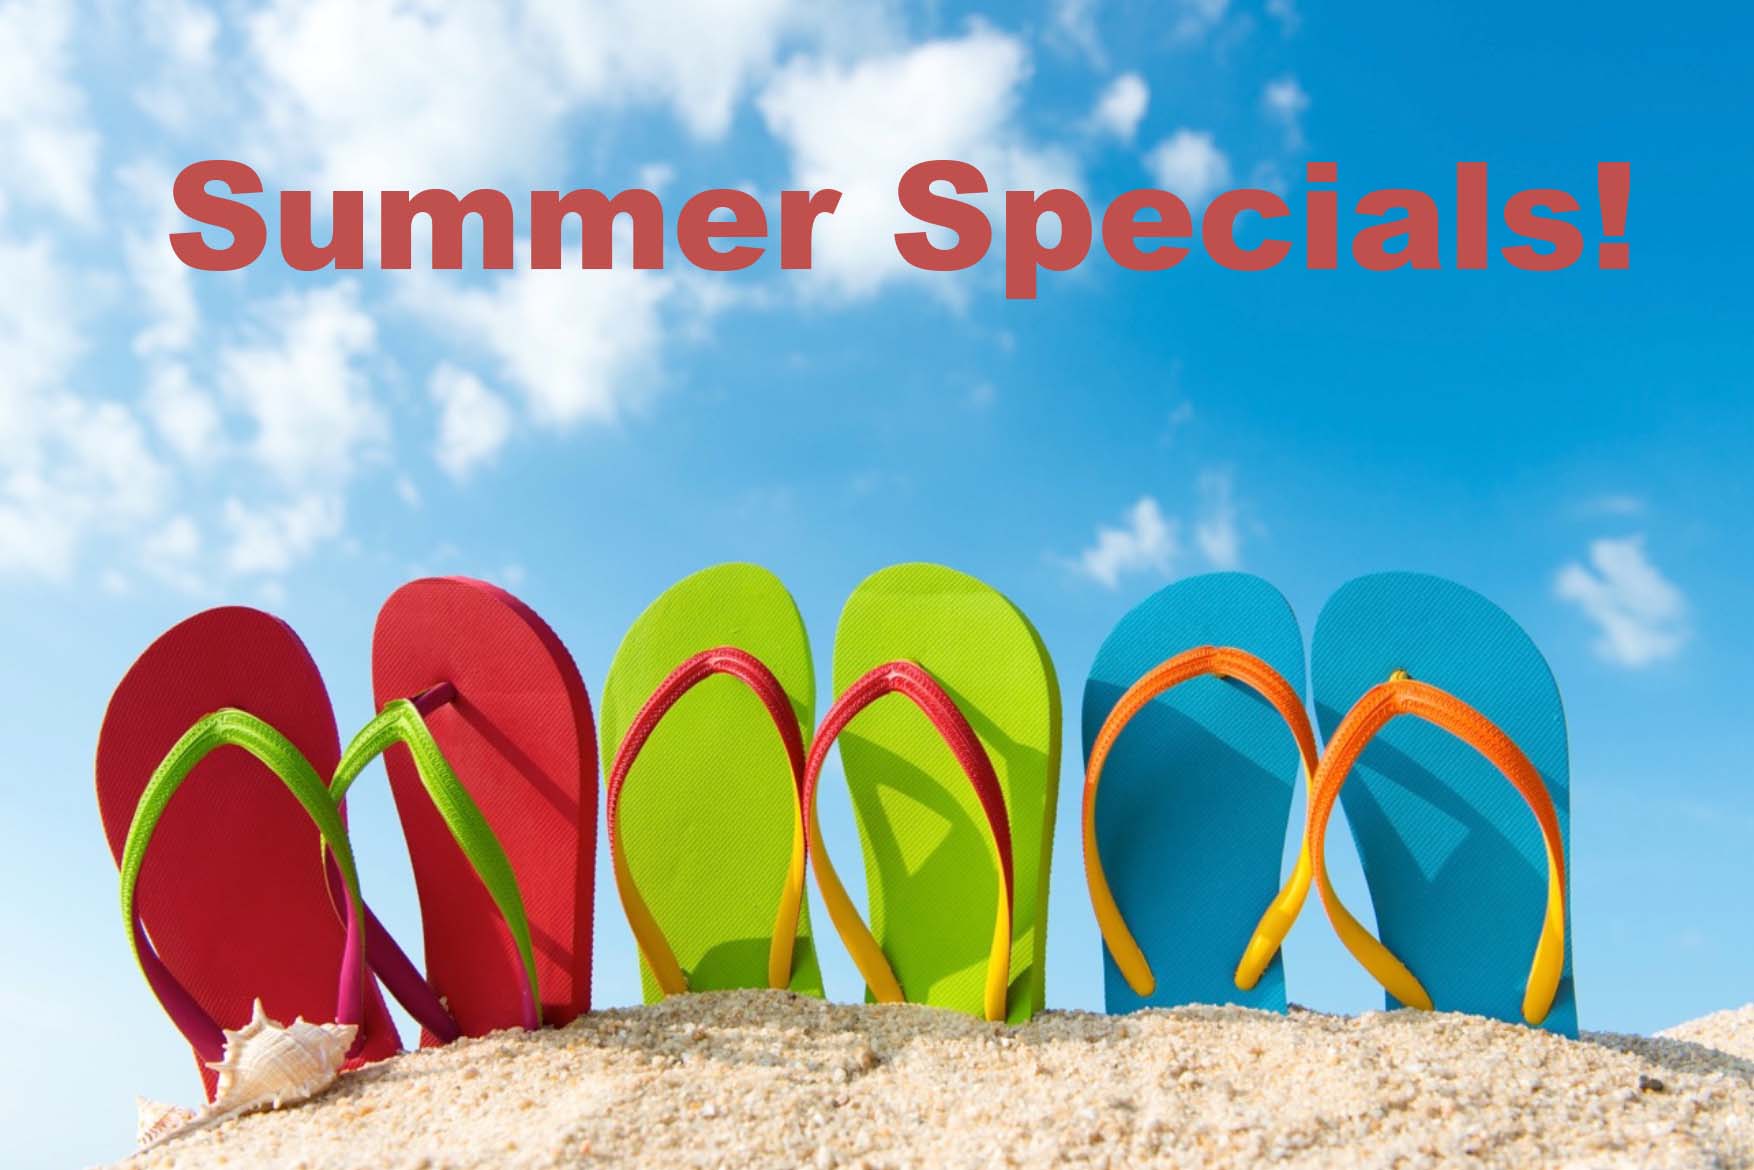 summerspecial - Sharmaines Salon and Day Spa